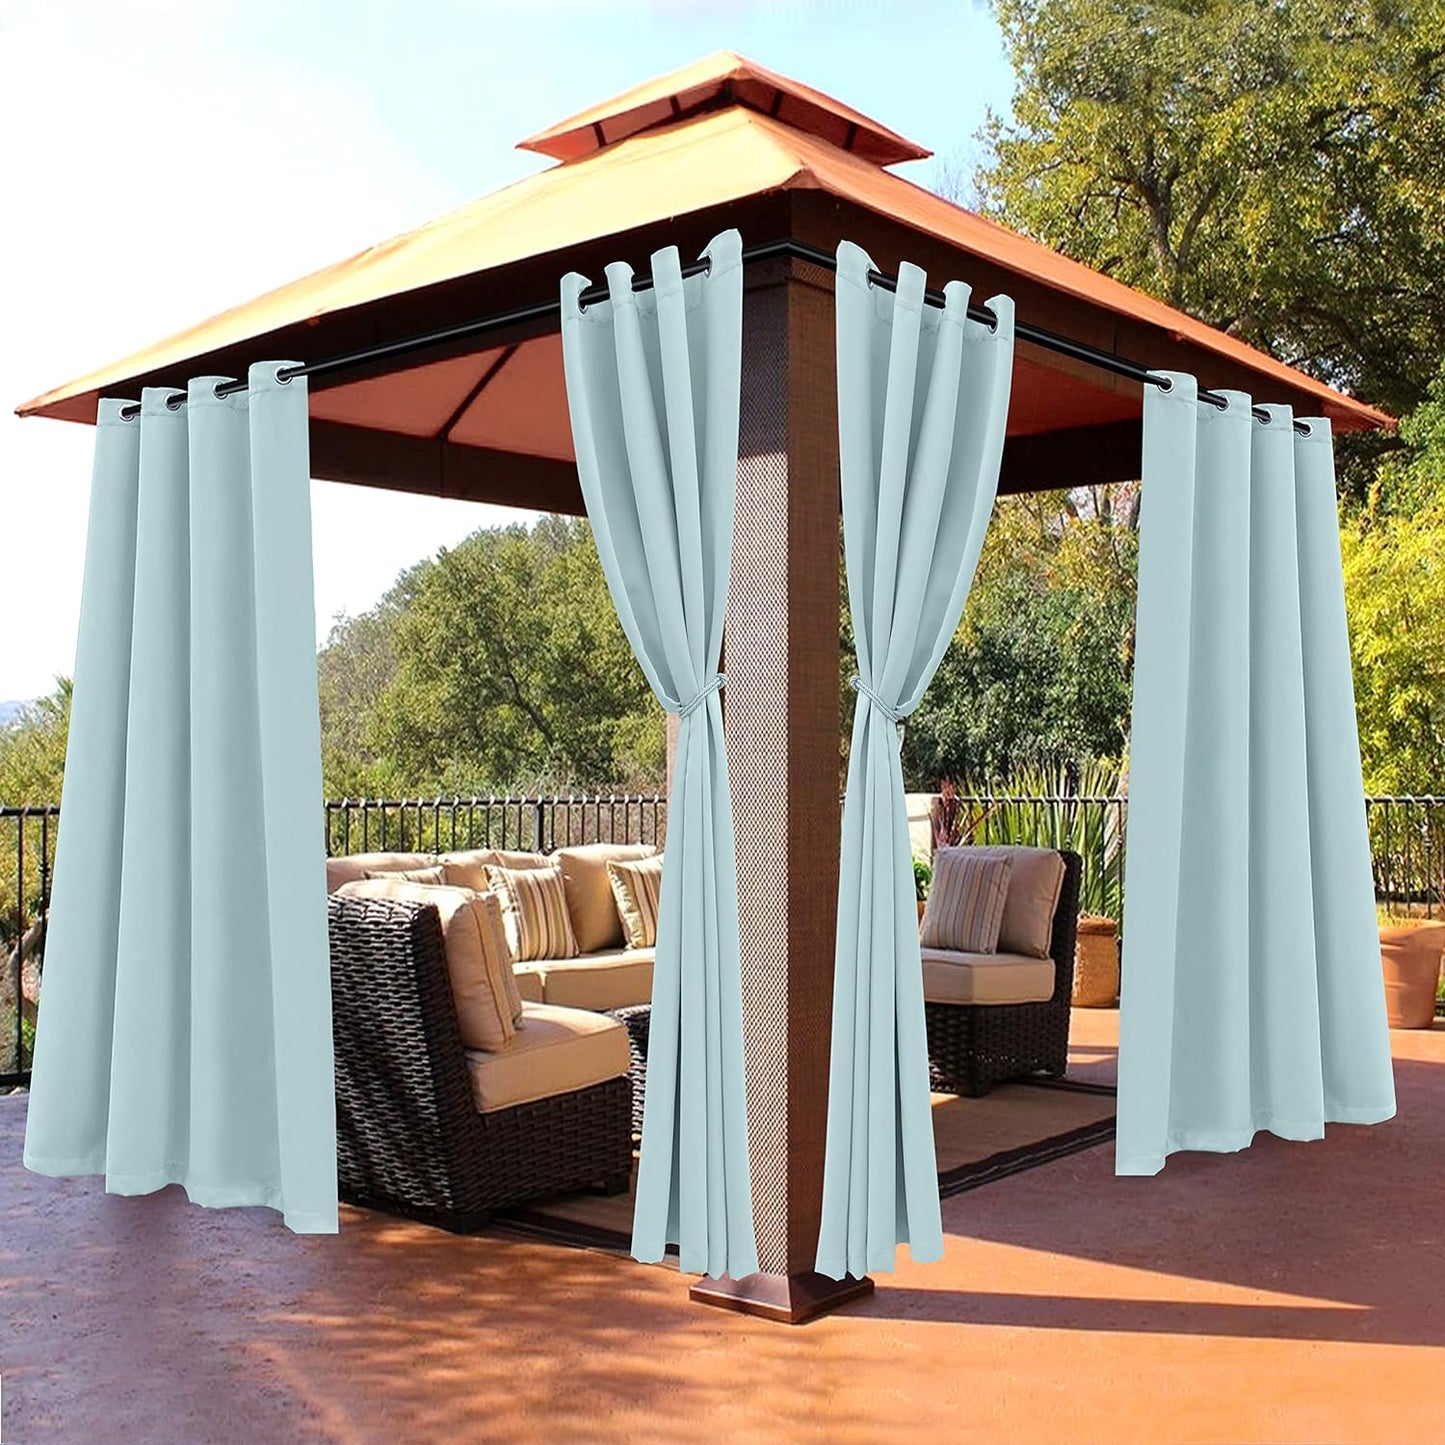 BONZER Outdoor Curtains for Patio Waterproof - Light Blocking Weather Resistant Privacy Grommet Blackout Curtains for Gazebo, Porch, Pergola, Cabana, Deck, Sunroom, 1 Panel, 52W X 84L Inch, Silver  BONZER Seafoam 52W X 108 Inch 